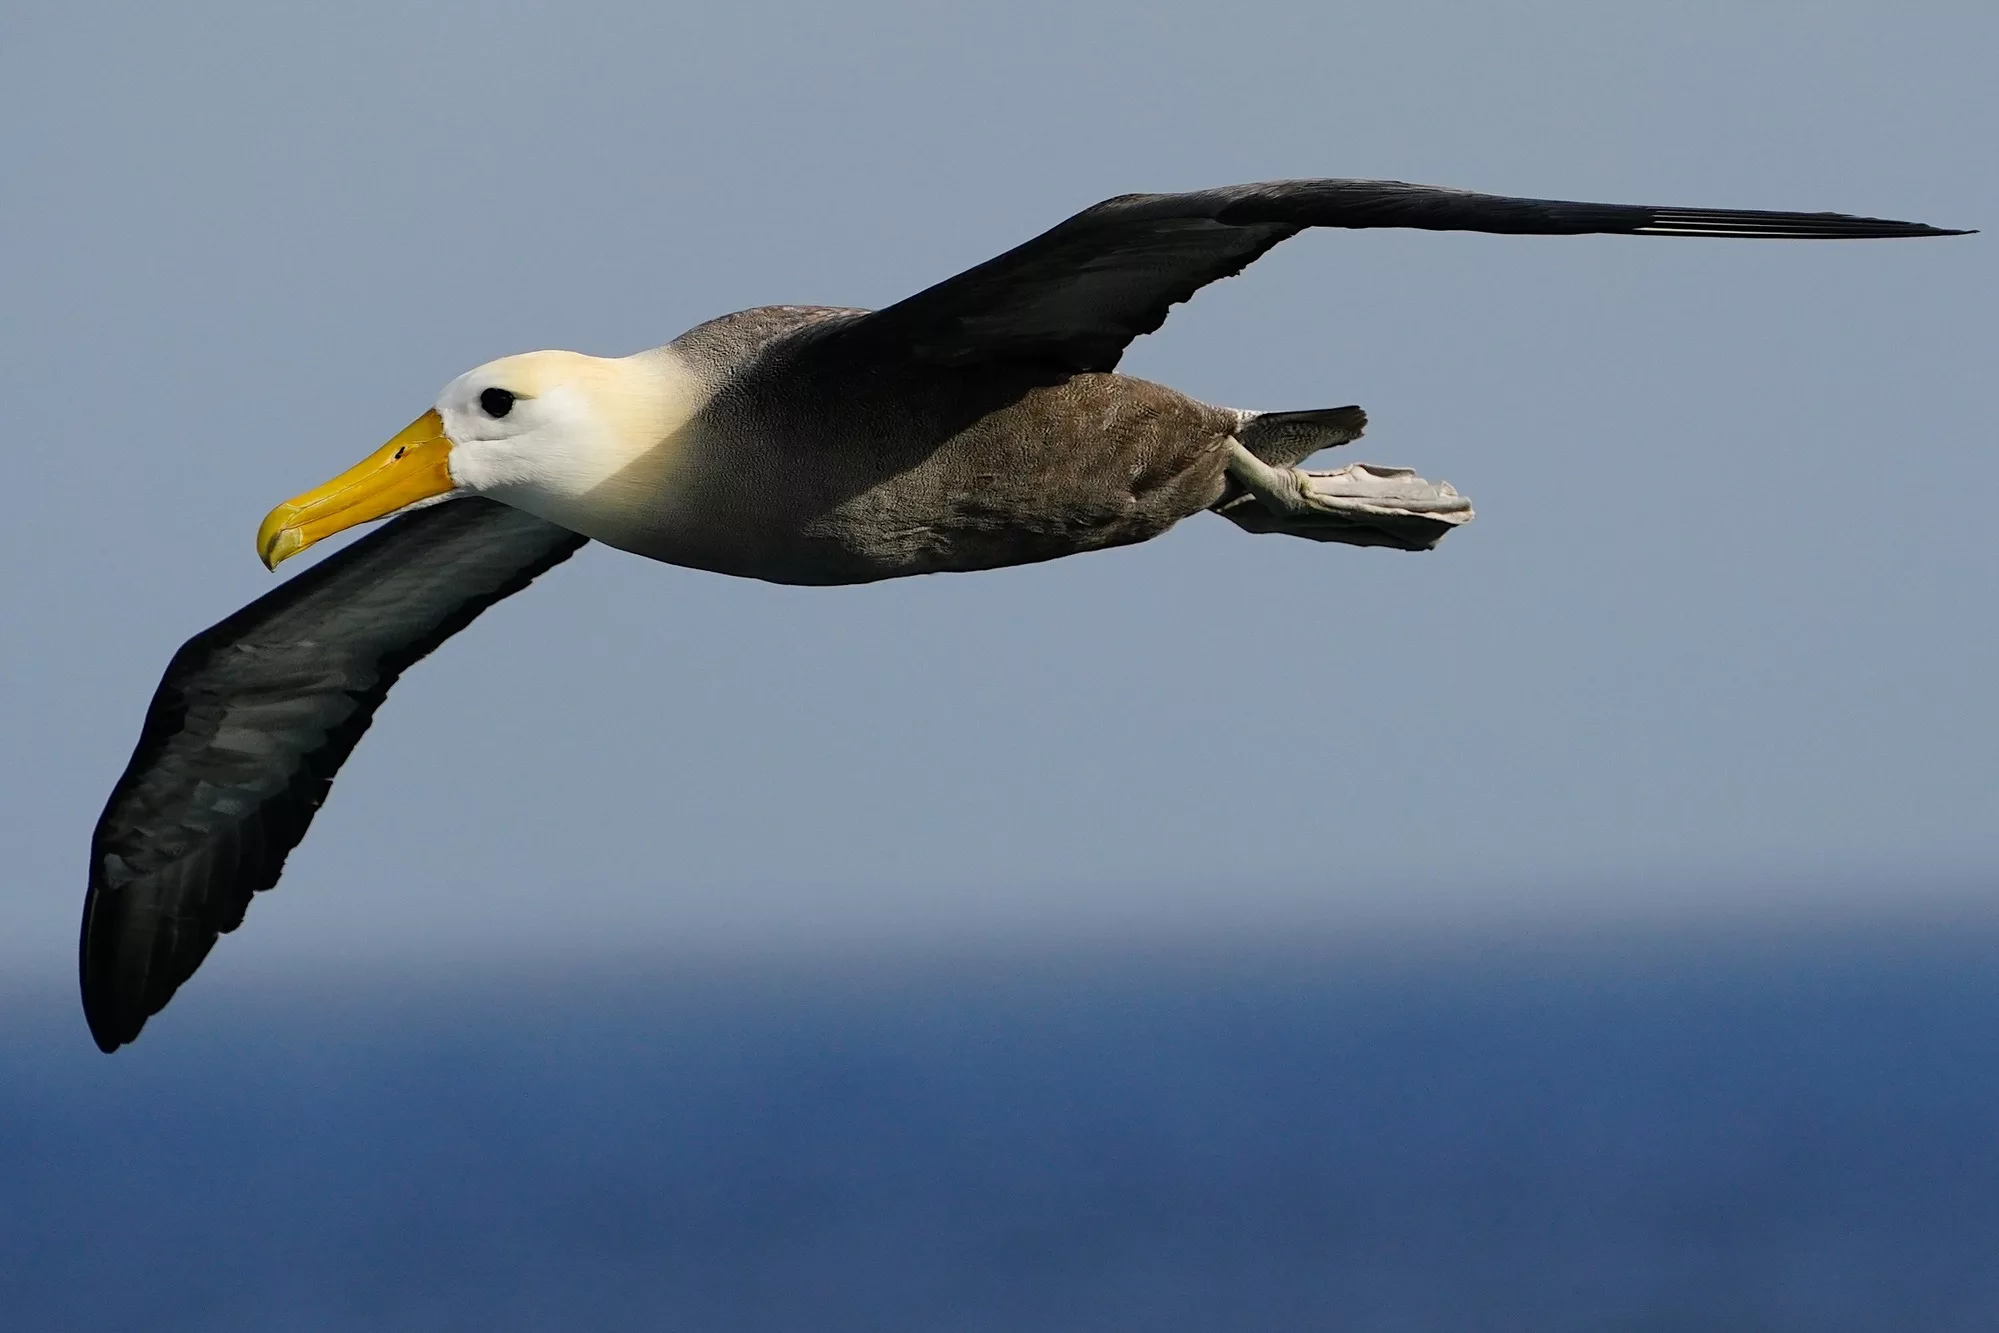 Galapagos Islands Yacht-Based Tour & Guided Photography Experience - Albatross